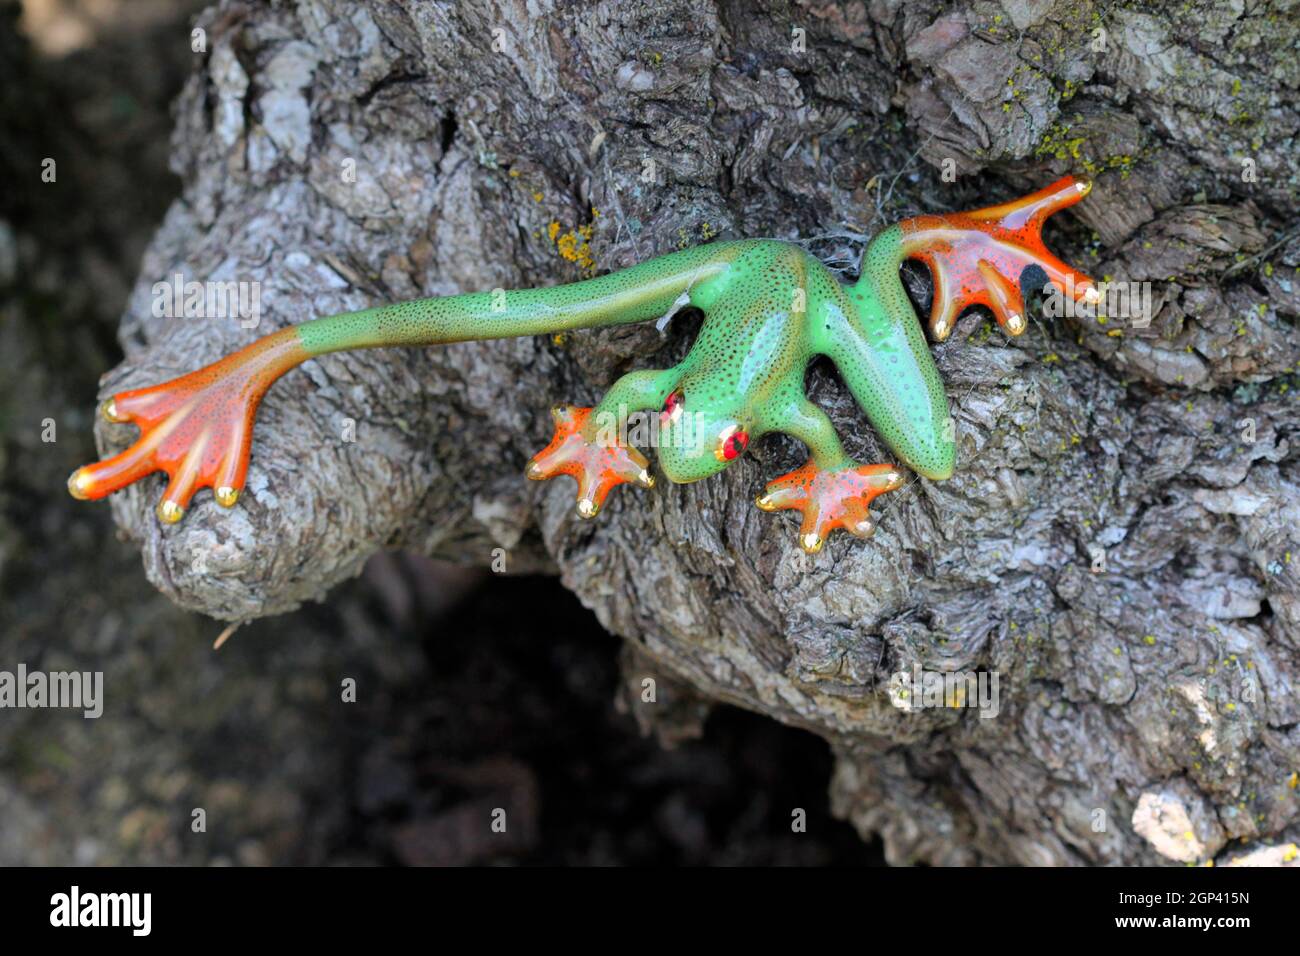 This ornamental green frog statue with orange feet is decorated with tiny small black spots. Stock Photo